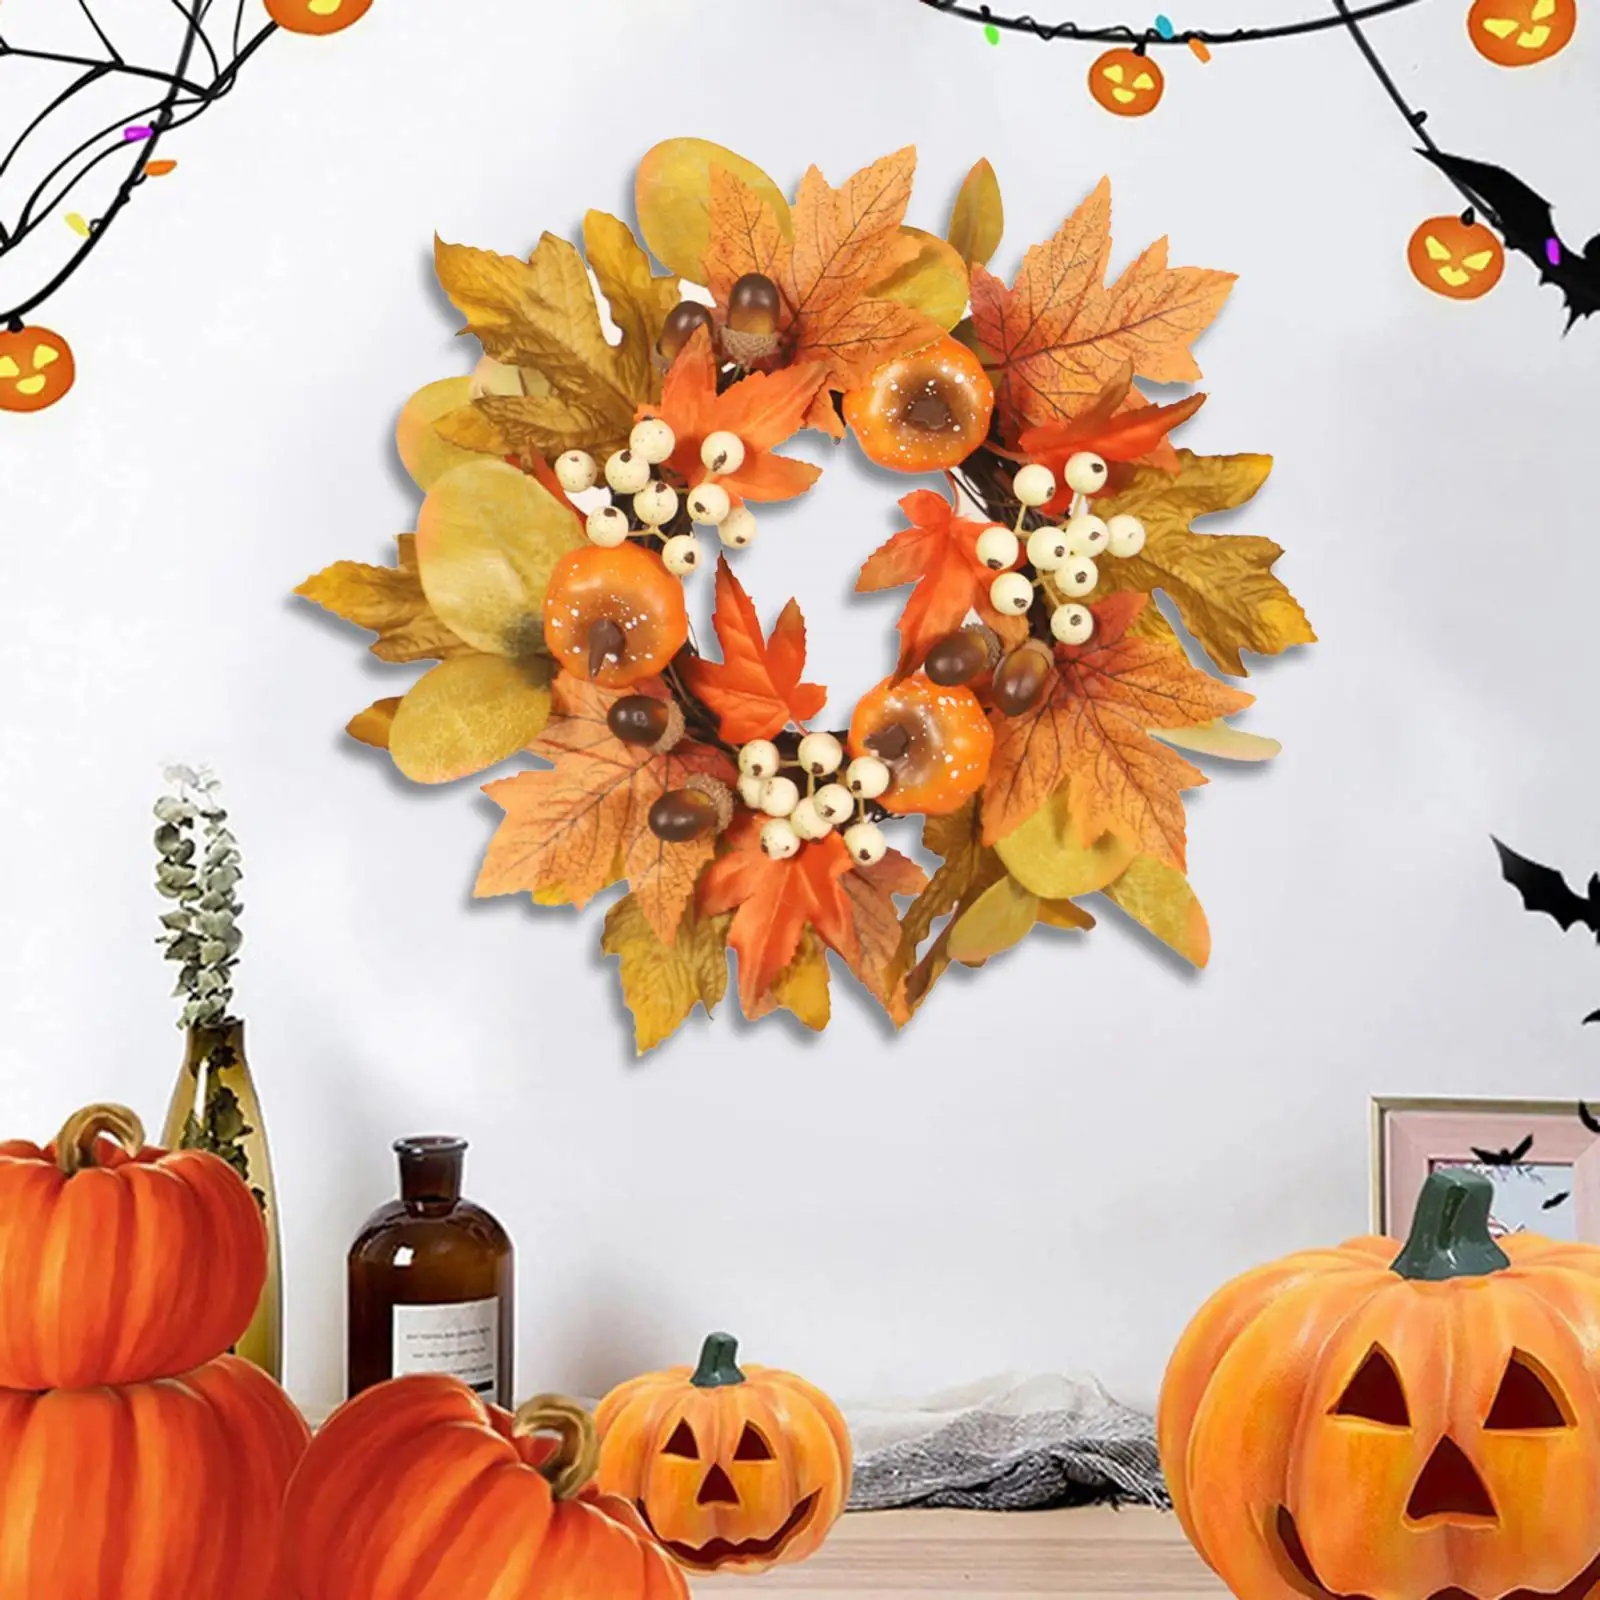 Fall Candle Rings Wreaths Candle Holder Decorative Rings Autumn Candle Rings for Party Living Room Farmhouse Home Dining Table